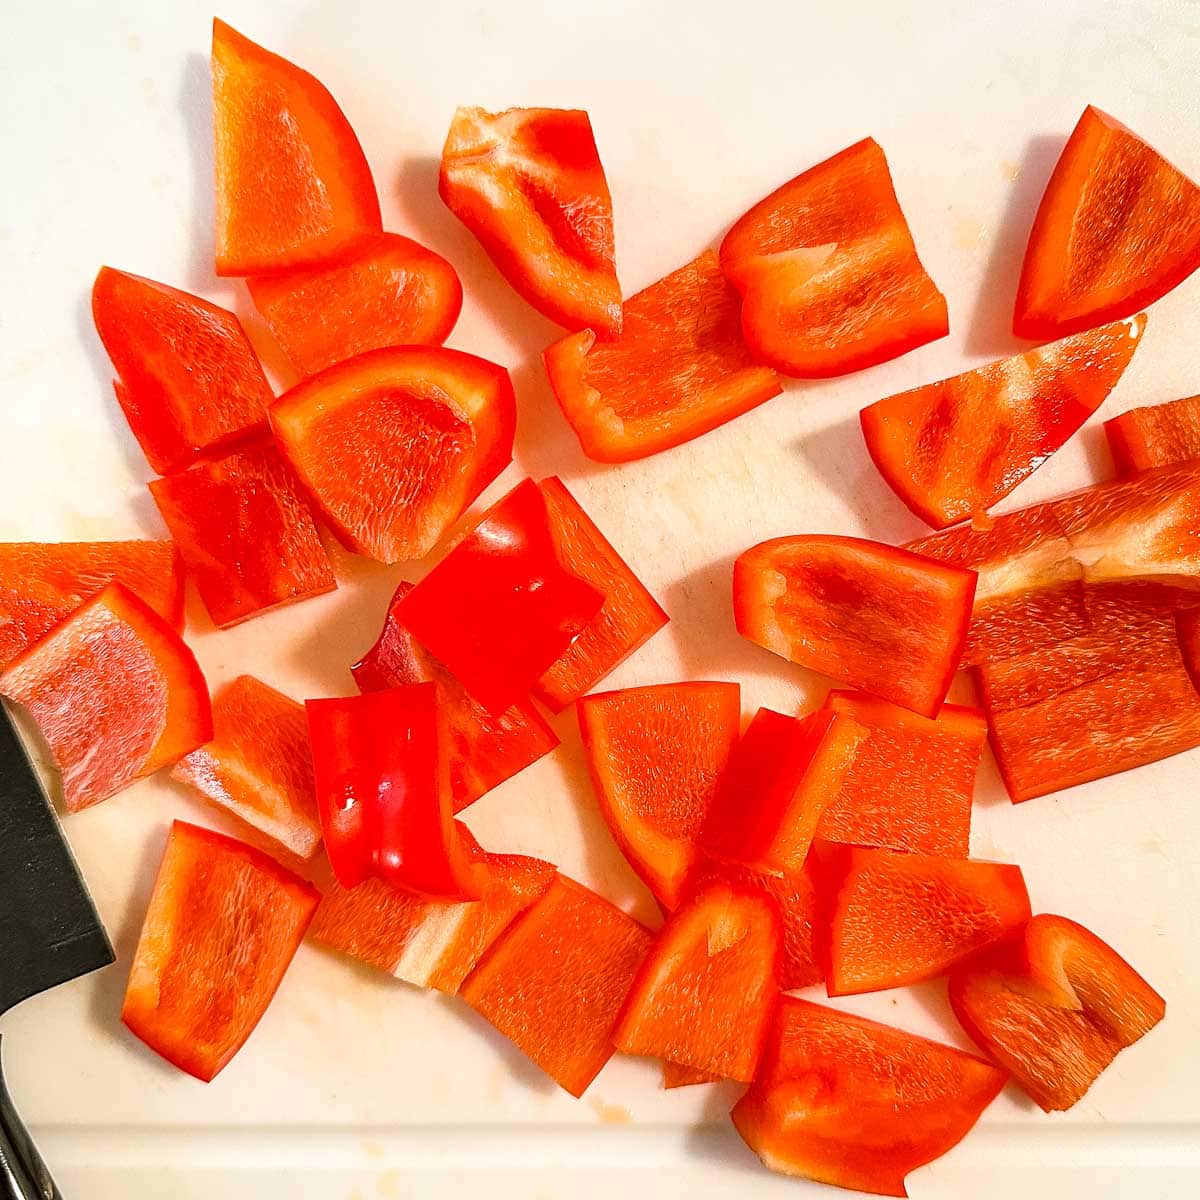 Chopped red bell pepper on a white cutting board.